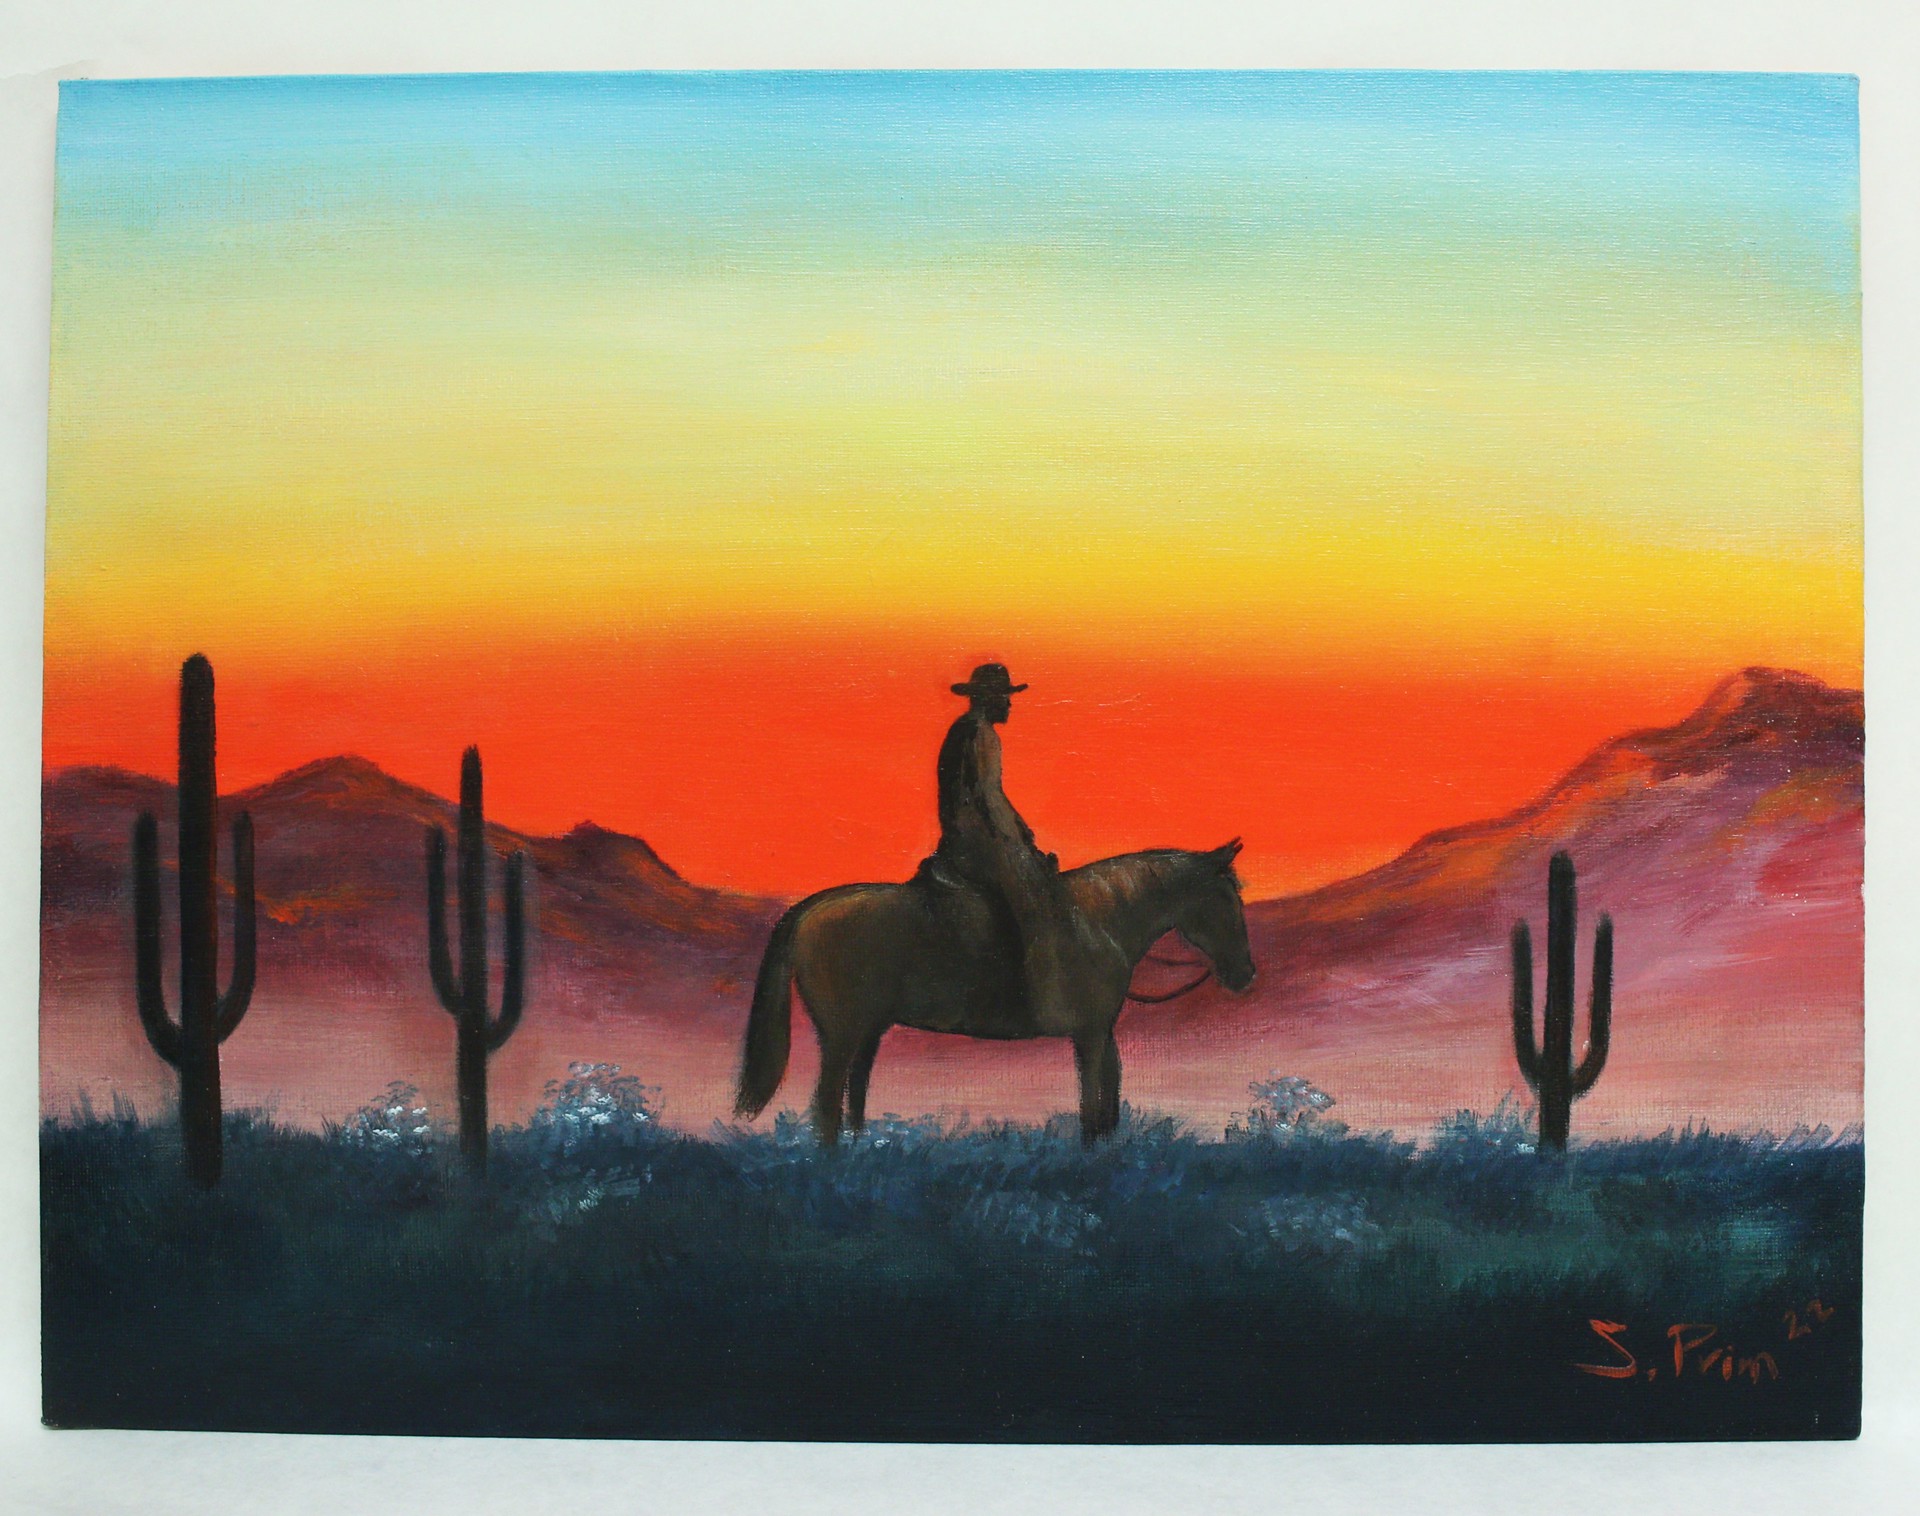 Lone Sunset Cowboy by S. Prim